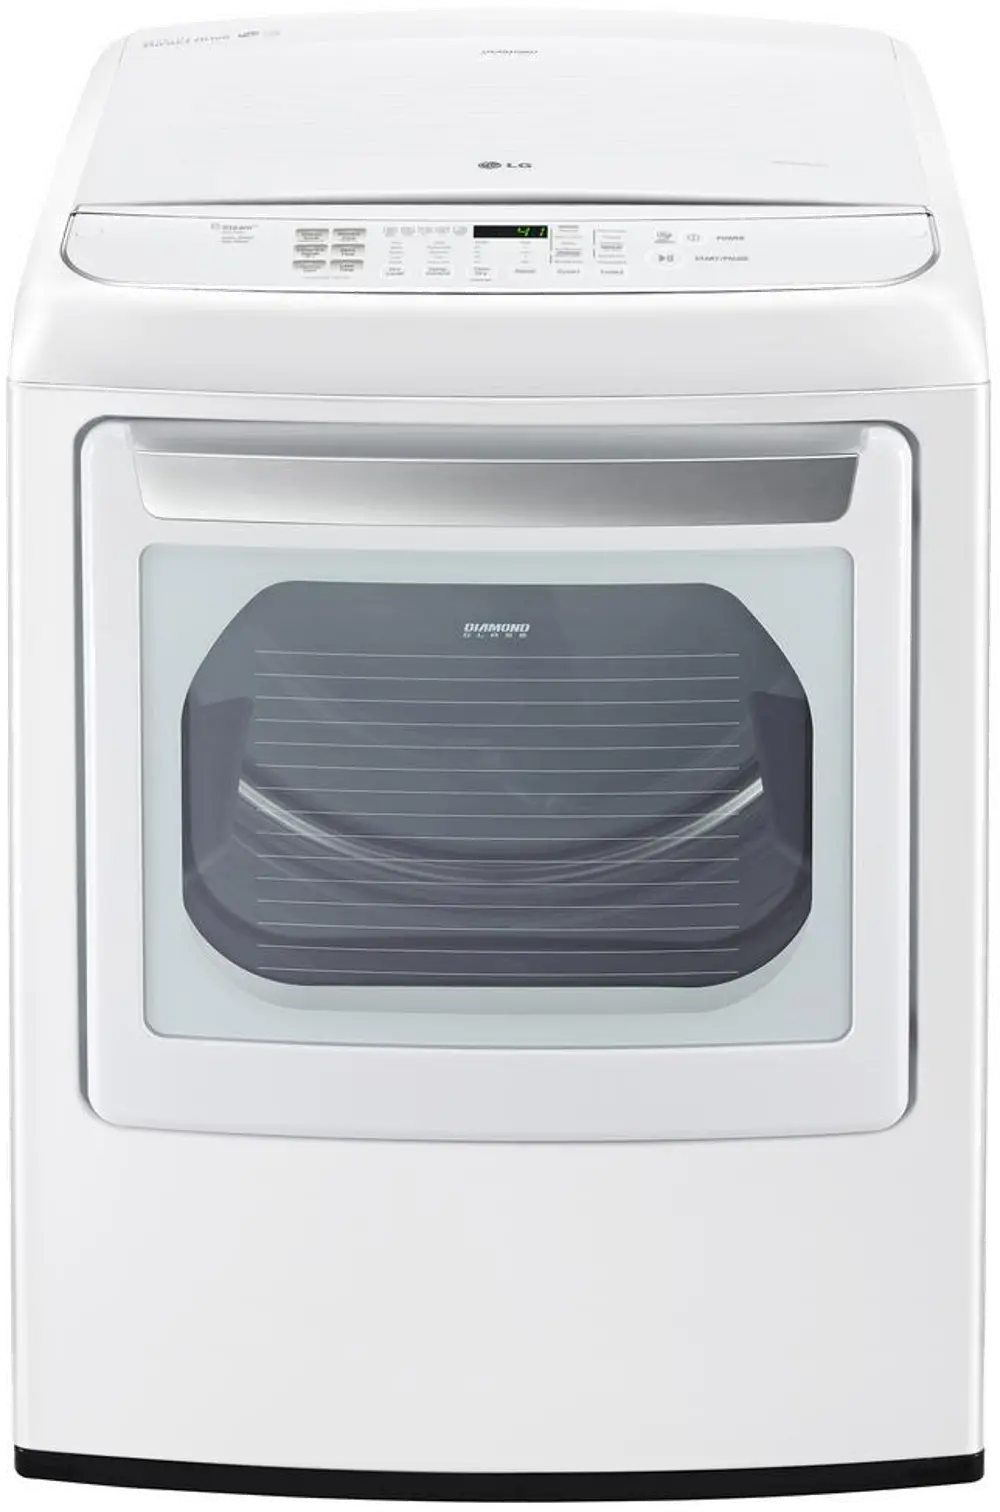 DLEY1901WE LG Electric Steam Cleaning Dryer -  7.3 cu. ft. White-1